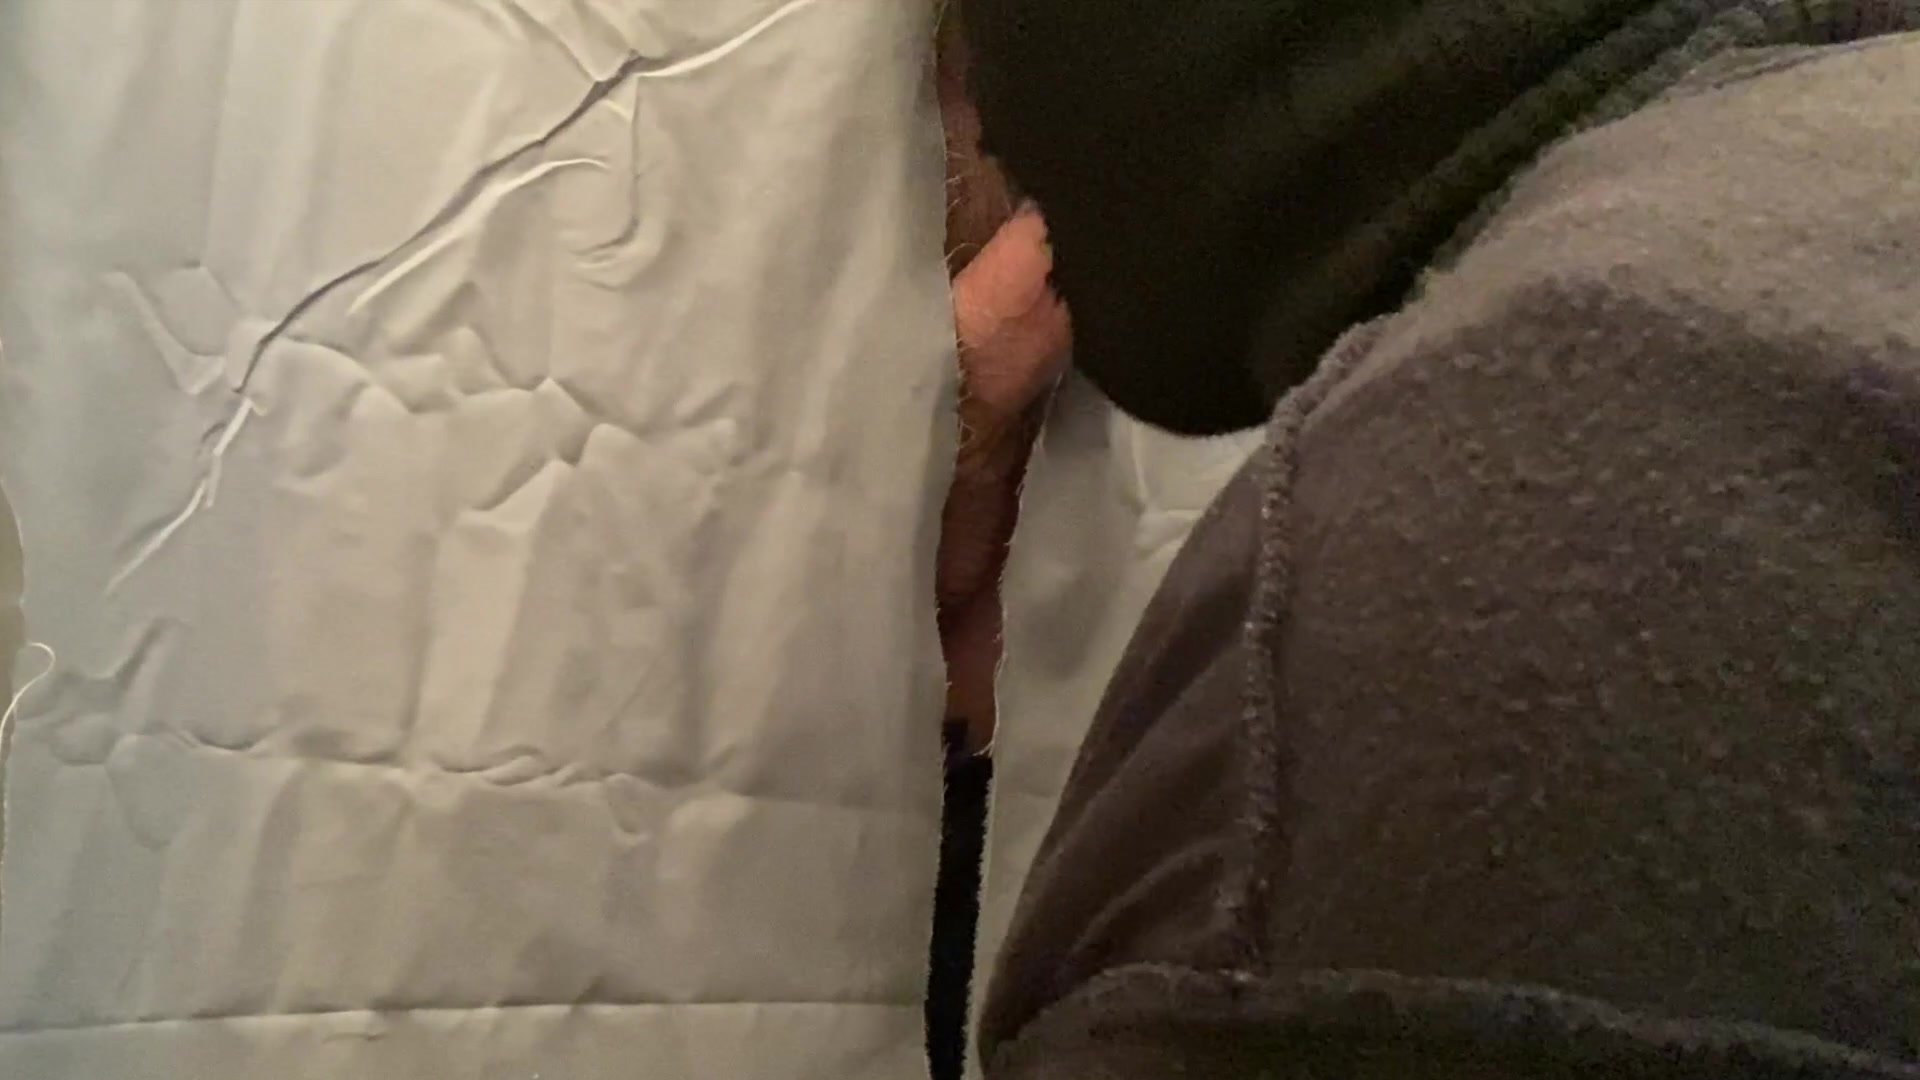 college guy gets blowjob at homemade gloryhole and blows a nice load